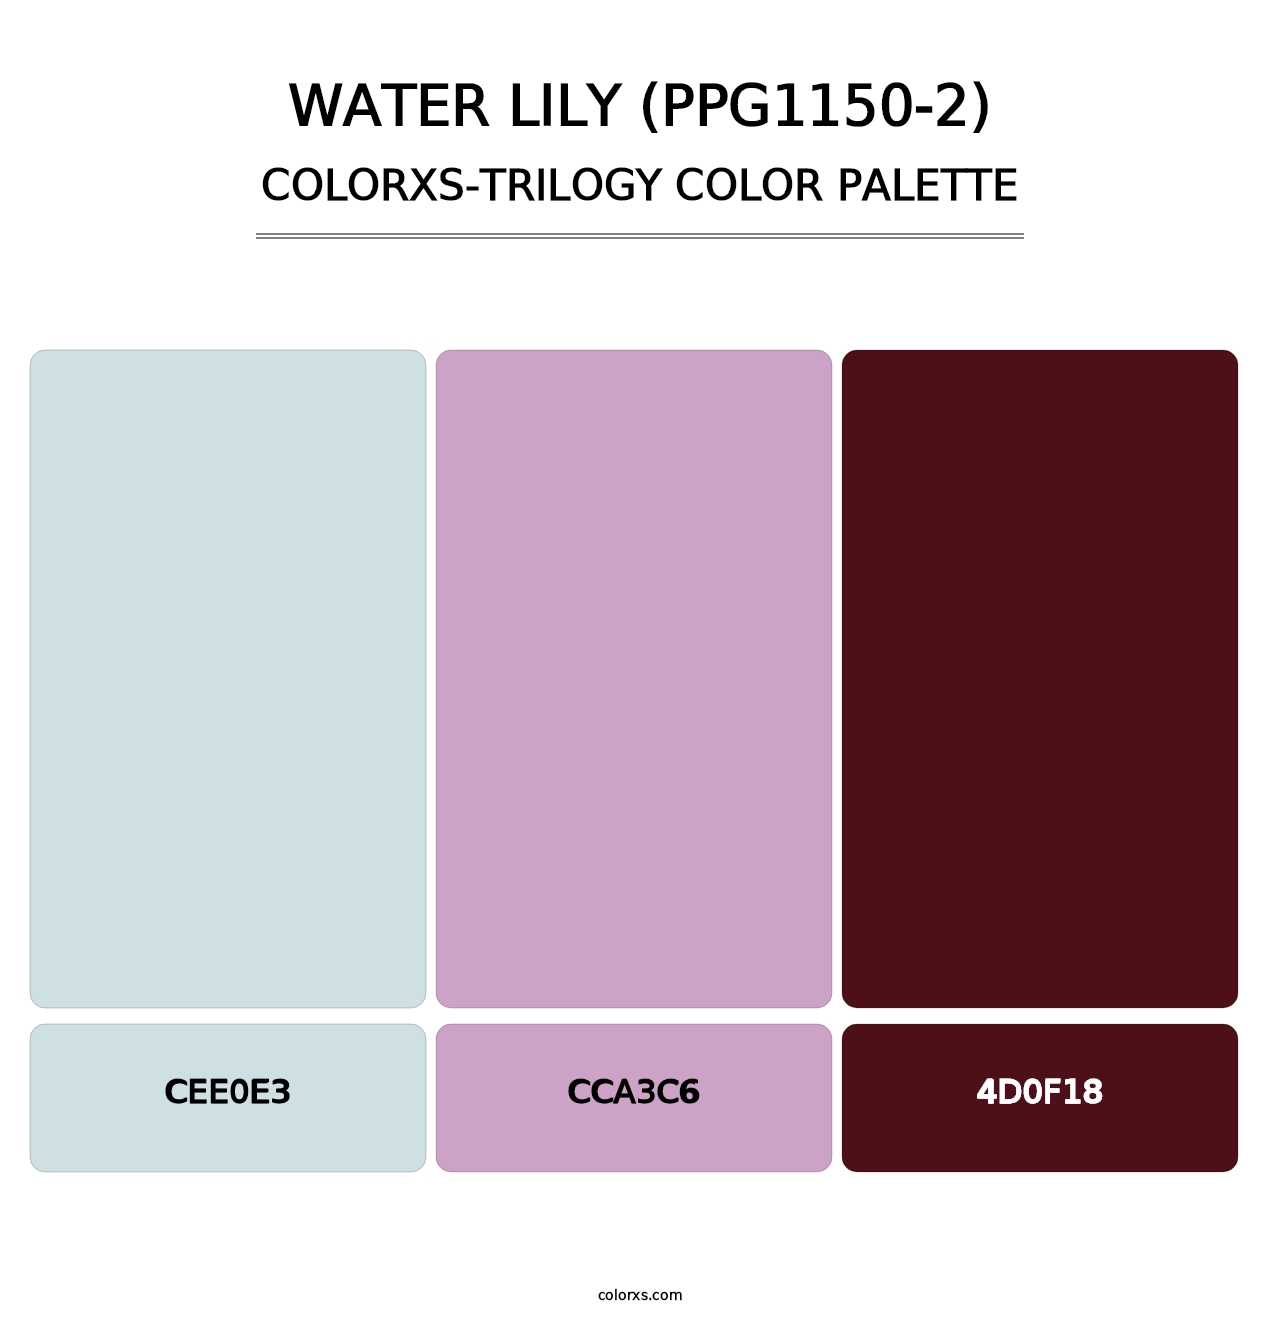 Water Lily (PPG1150-2) - Colorxs Trilogy Palette